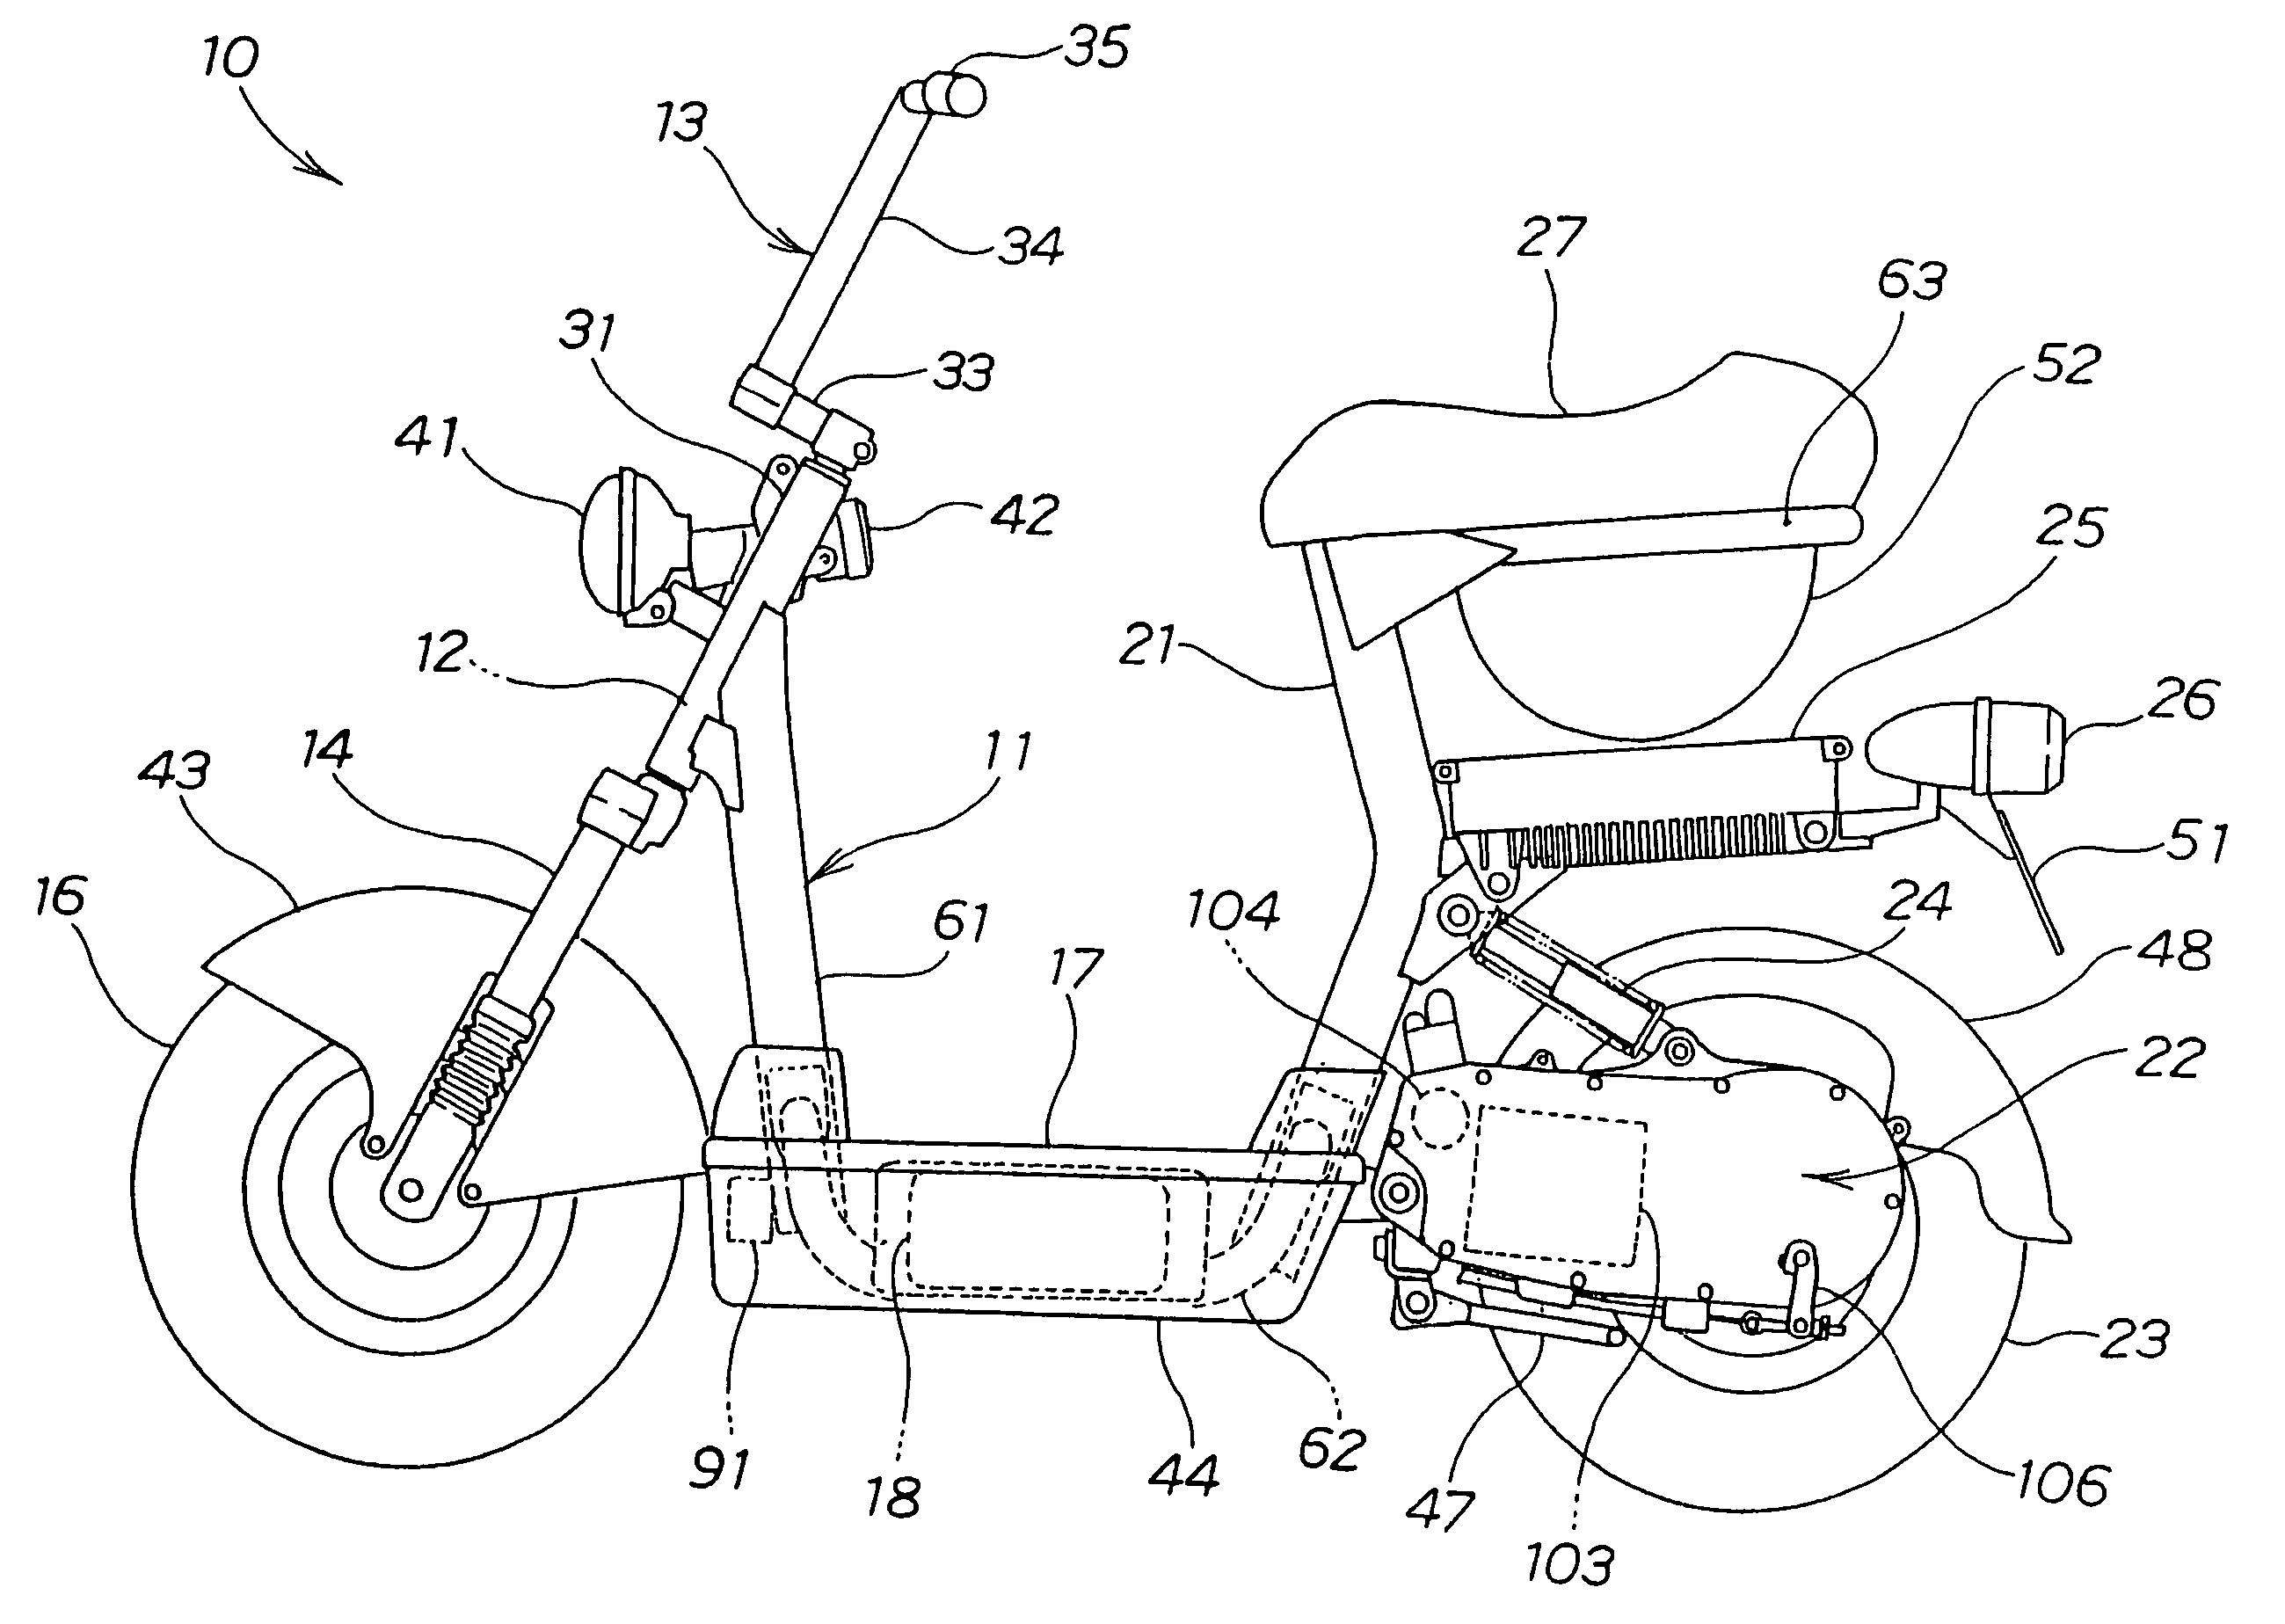 Under-seat structure for a motorcycle